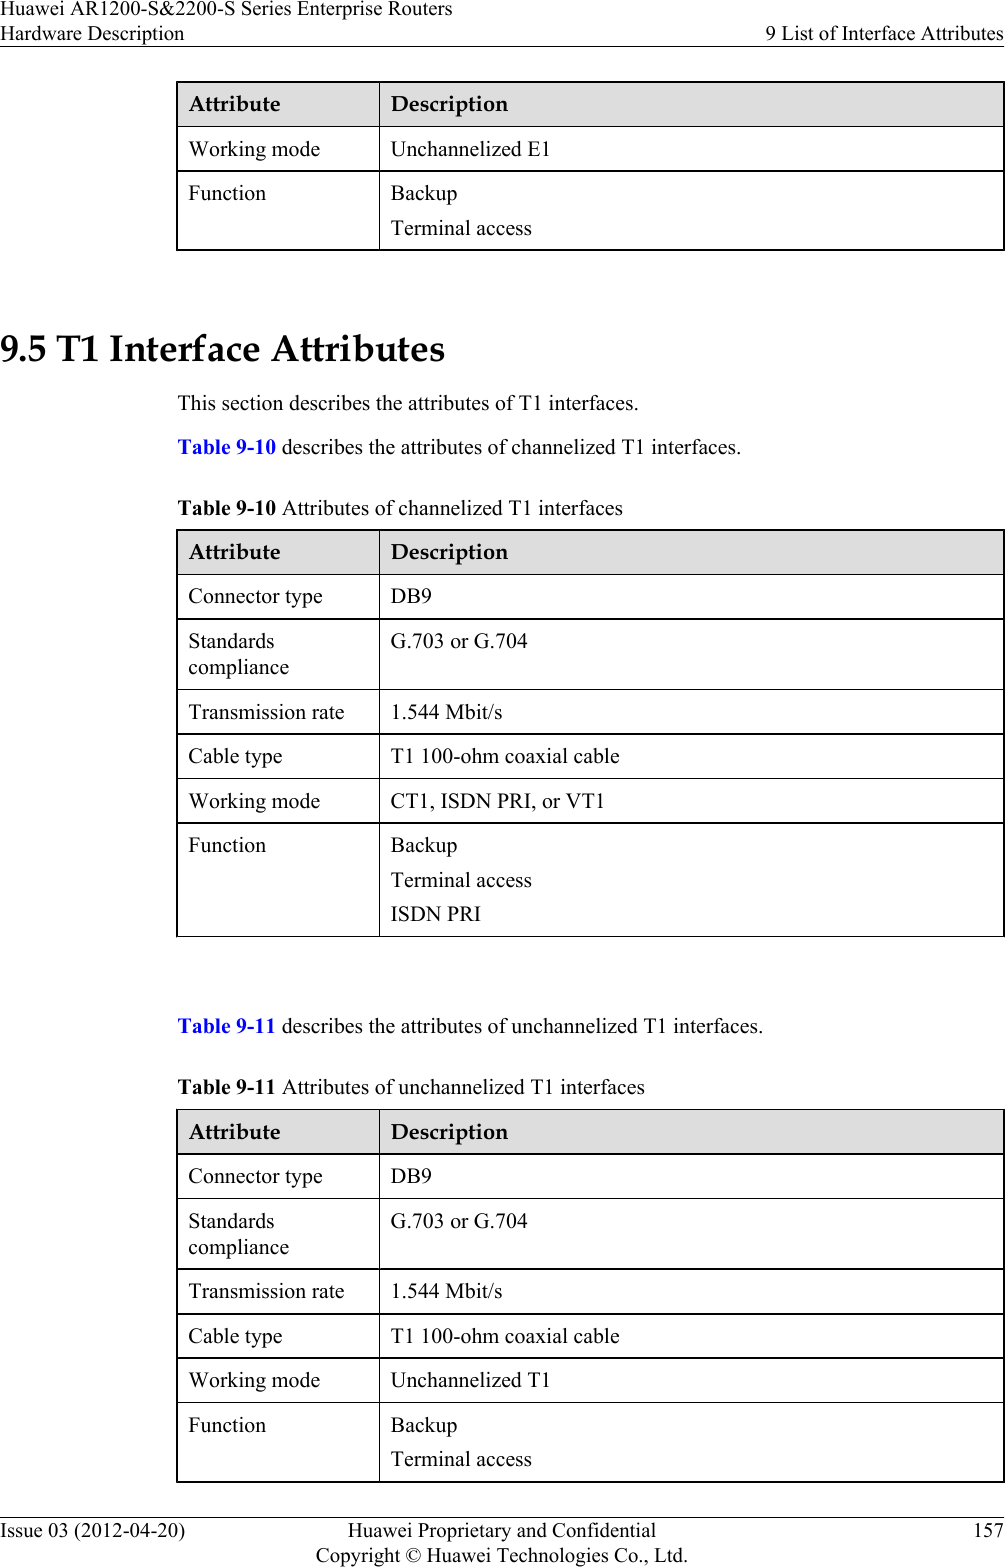 Attribute DescriptionWorking mode Unchannelized E1Function BackupTerminal access 9.5 T1 Interface AttributesThis section describes the attributes of T1 interfaces.Table 9-10 describes the attributes of channelized T1 interfaces.Table 9-10 Attributes of channelized T1 interfacesAttribute DescriptionConnector type DB9StandardscomplianceG.703 or G.704Transmission rate 1.544 Mbit/sCable type T1 100-ohm coaxial cableWorking mode CT1, ISDN PRI, or VT1Function BackupTerminal accessISDN PRI Table 9-11 describes the attributes of unchannelized T1 interfaces.Table 9-11 Attributes of unchannelized T1 interfacesAttribute DescriptionConnector type DB9StandardscomplianceG.703 or G.704Transmission rate 1.544 Mbit/sCable type T1 100-ohm coaxial cableWorking mode Unchannelized T1Function BackupTerminal accessHuawei AR1200-S&amp;2200-S Series Enterprise RoutersHardware Description 9 List of Interface AttributesIssue 03 (2012-04-20) Huawei Proprietary and ConfidentialCopyright © Huawei Technologies Co., Ltd.157